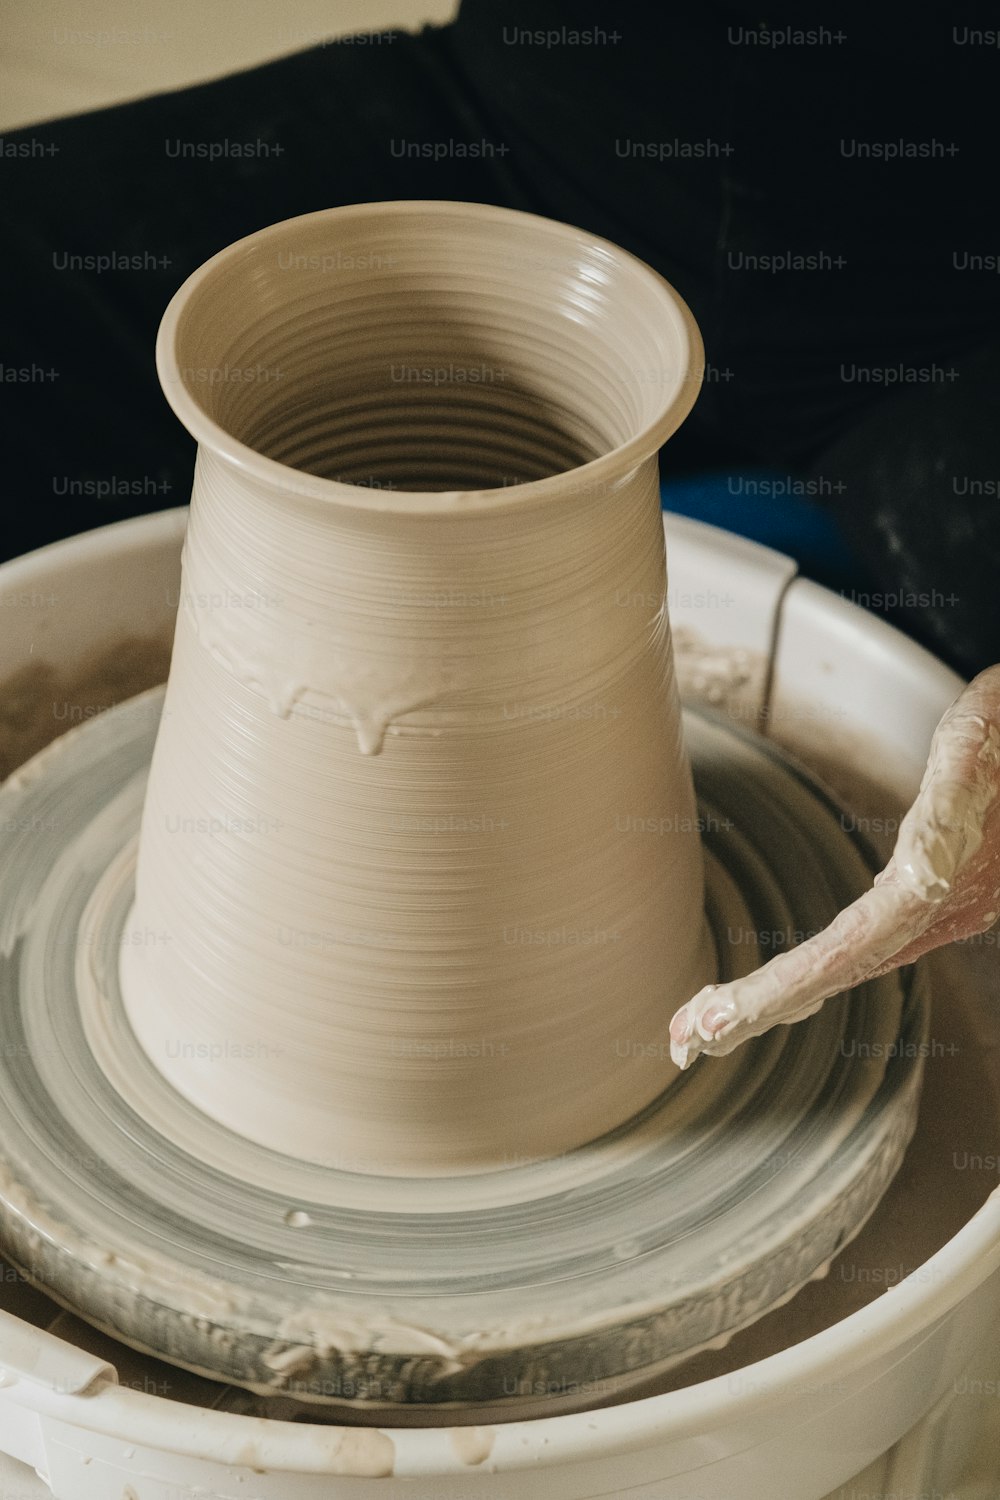 a person is making a vase on a potter's wheel